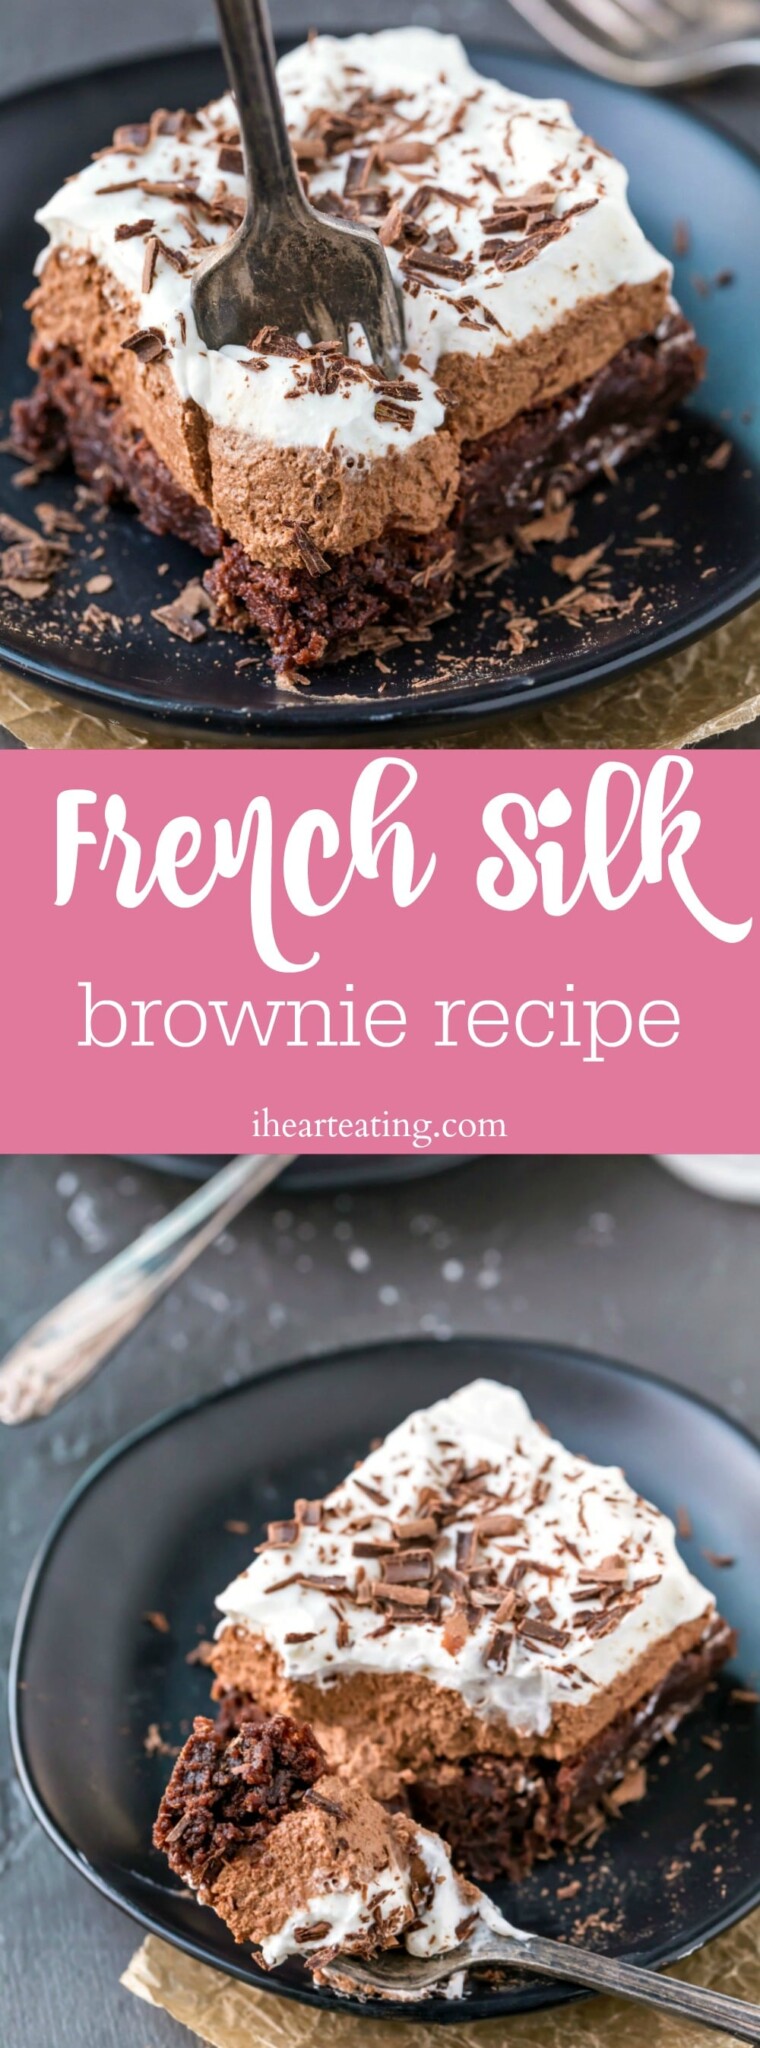 French Silk Brownies - I Heart Eating